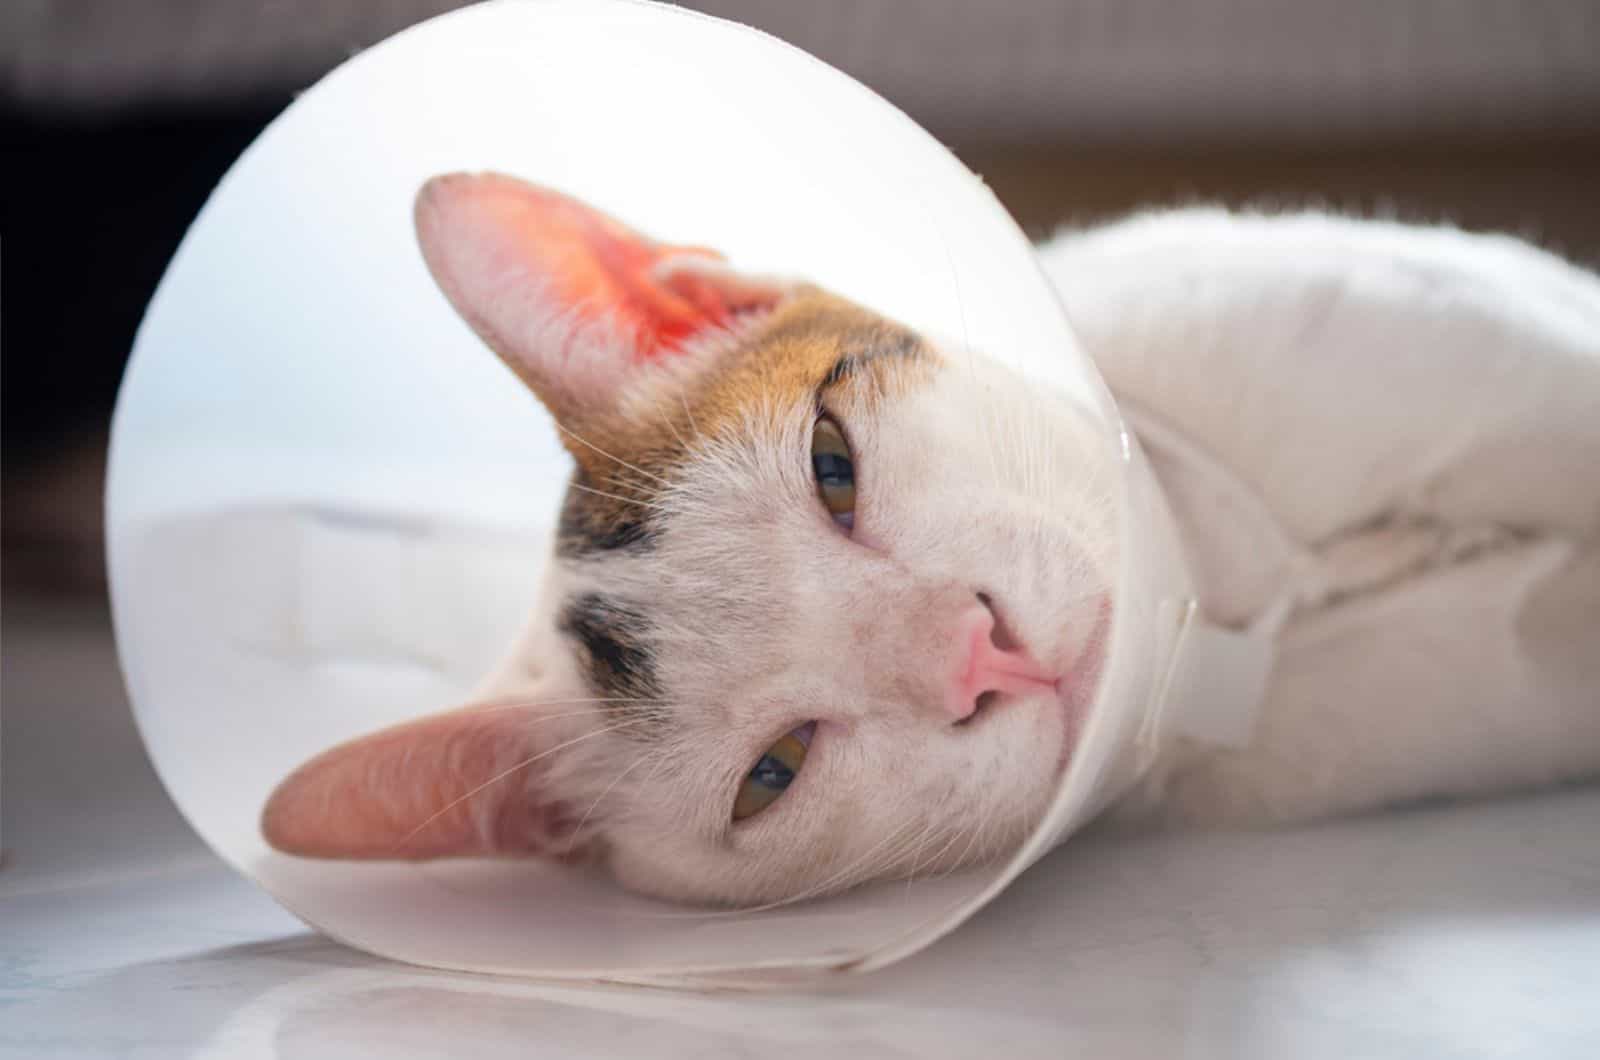 The cat wears a collar to prevent licking the wound after sterilization